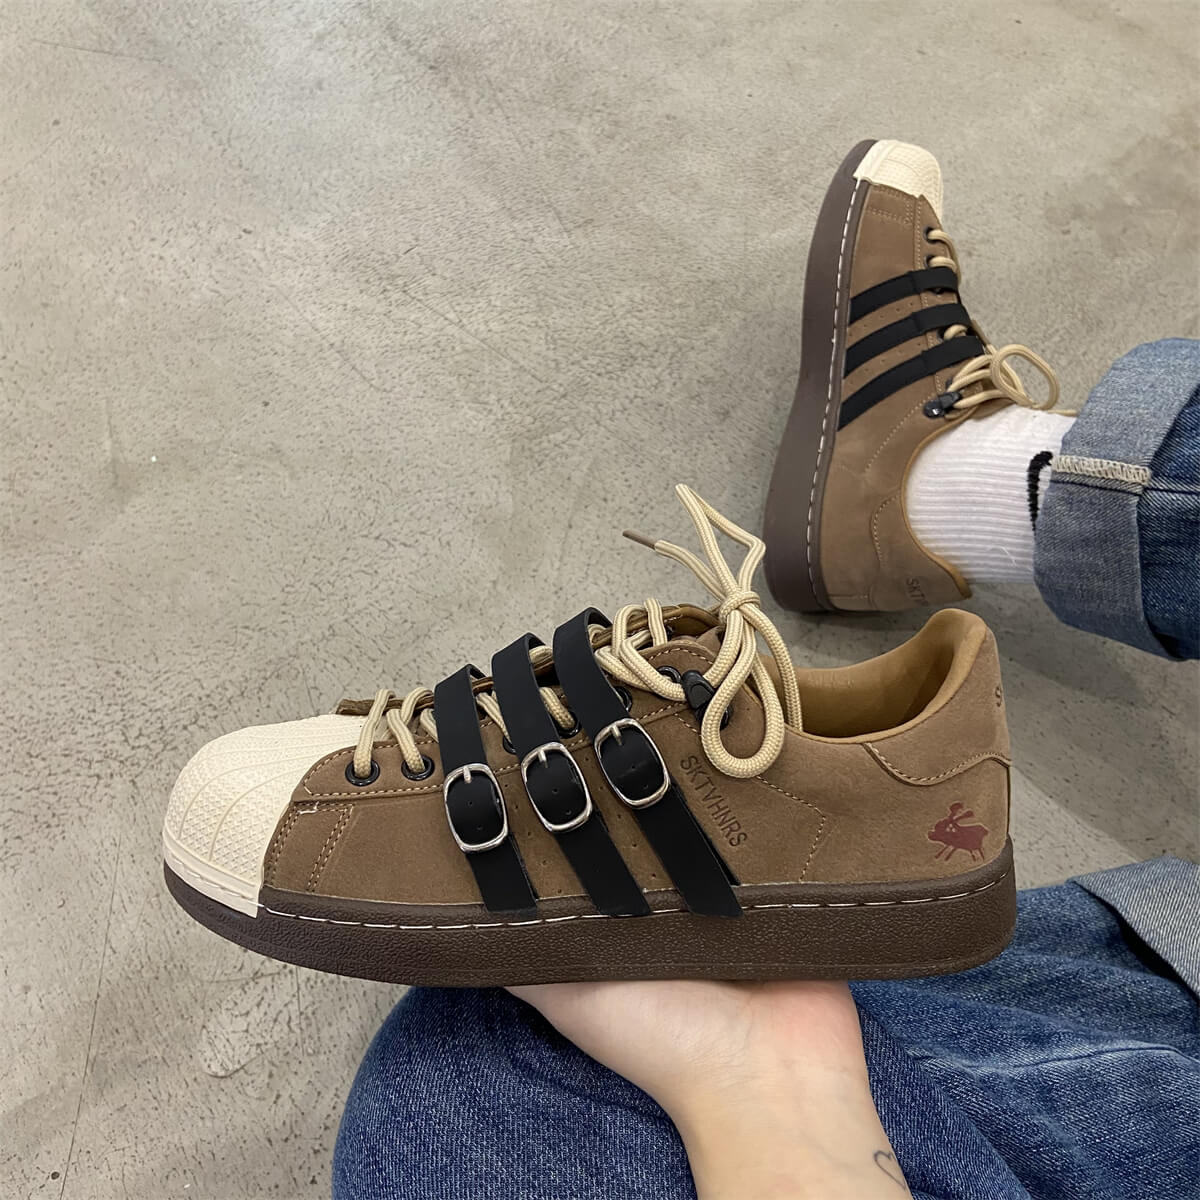 Brown Weircore Aesthetic Leather Straps Sneaker Boots